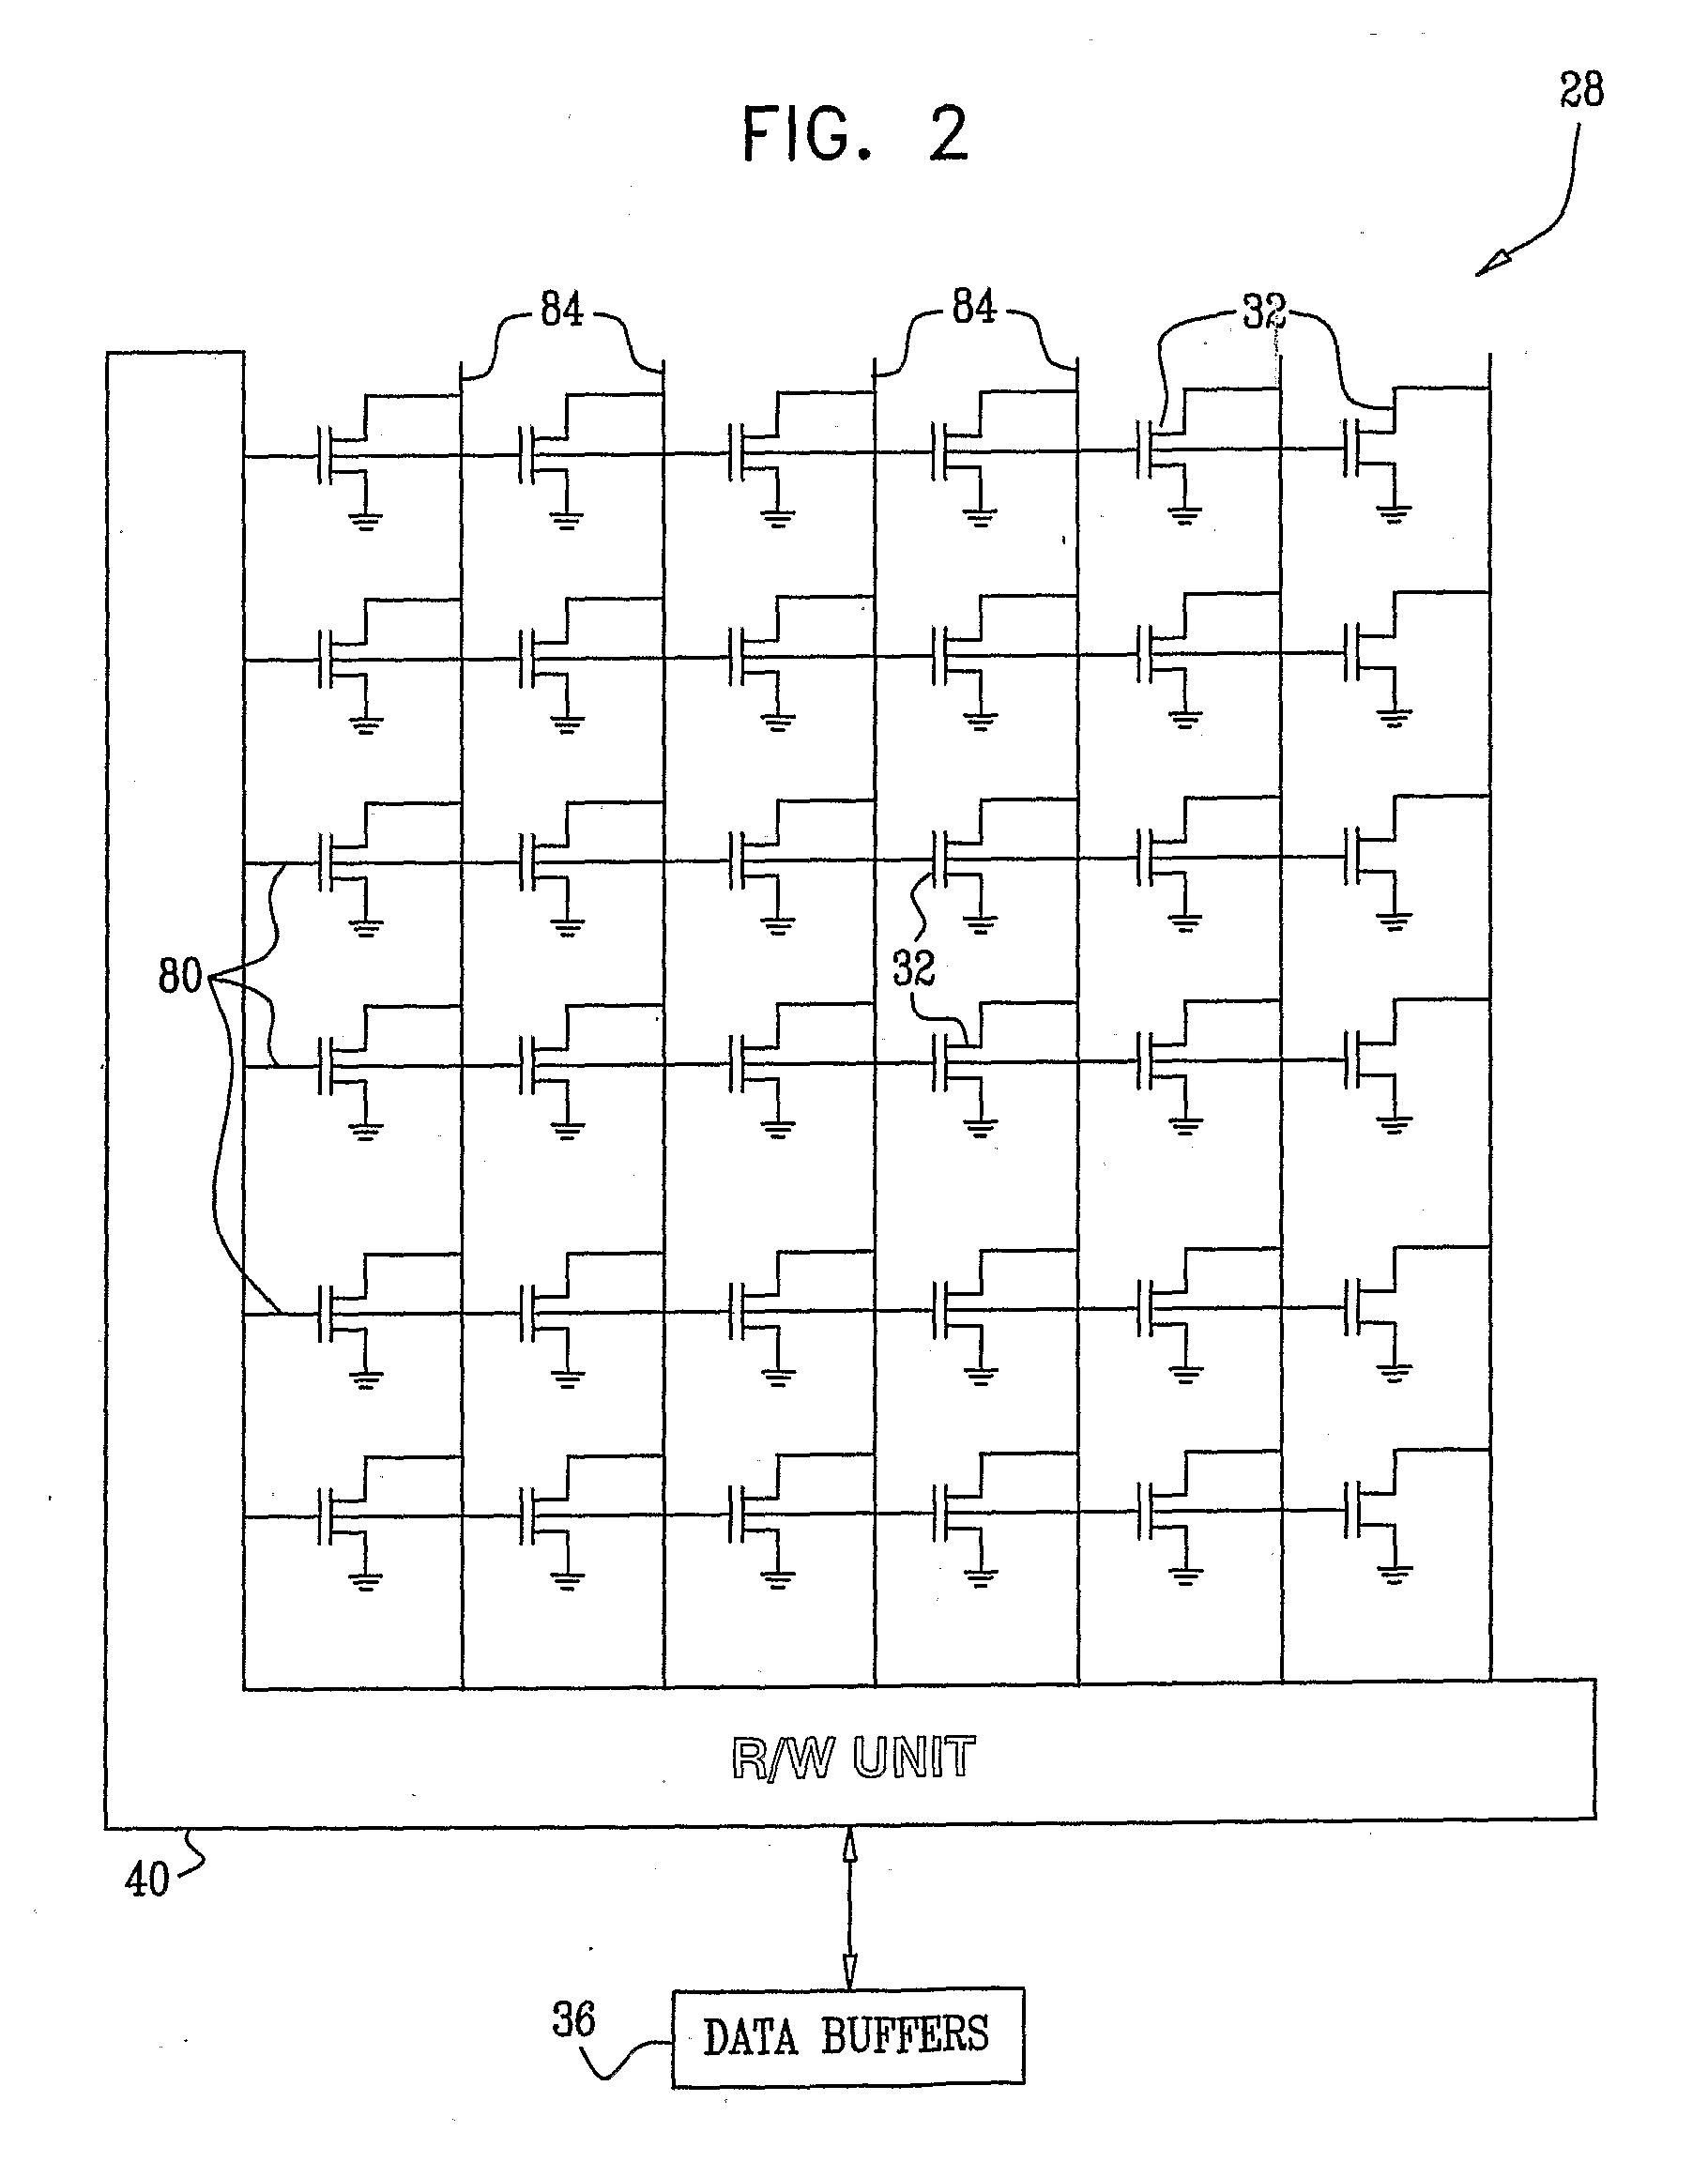 Combined distortion estimation and error correction coding for memory devices